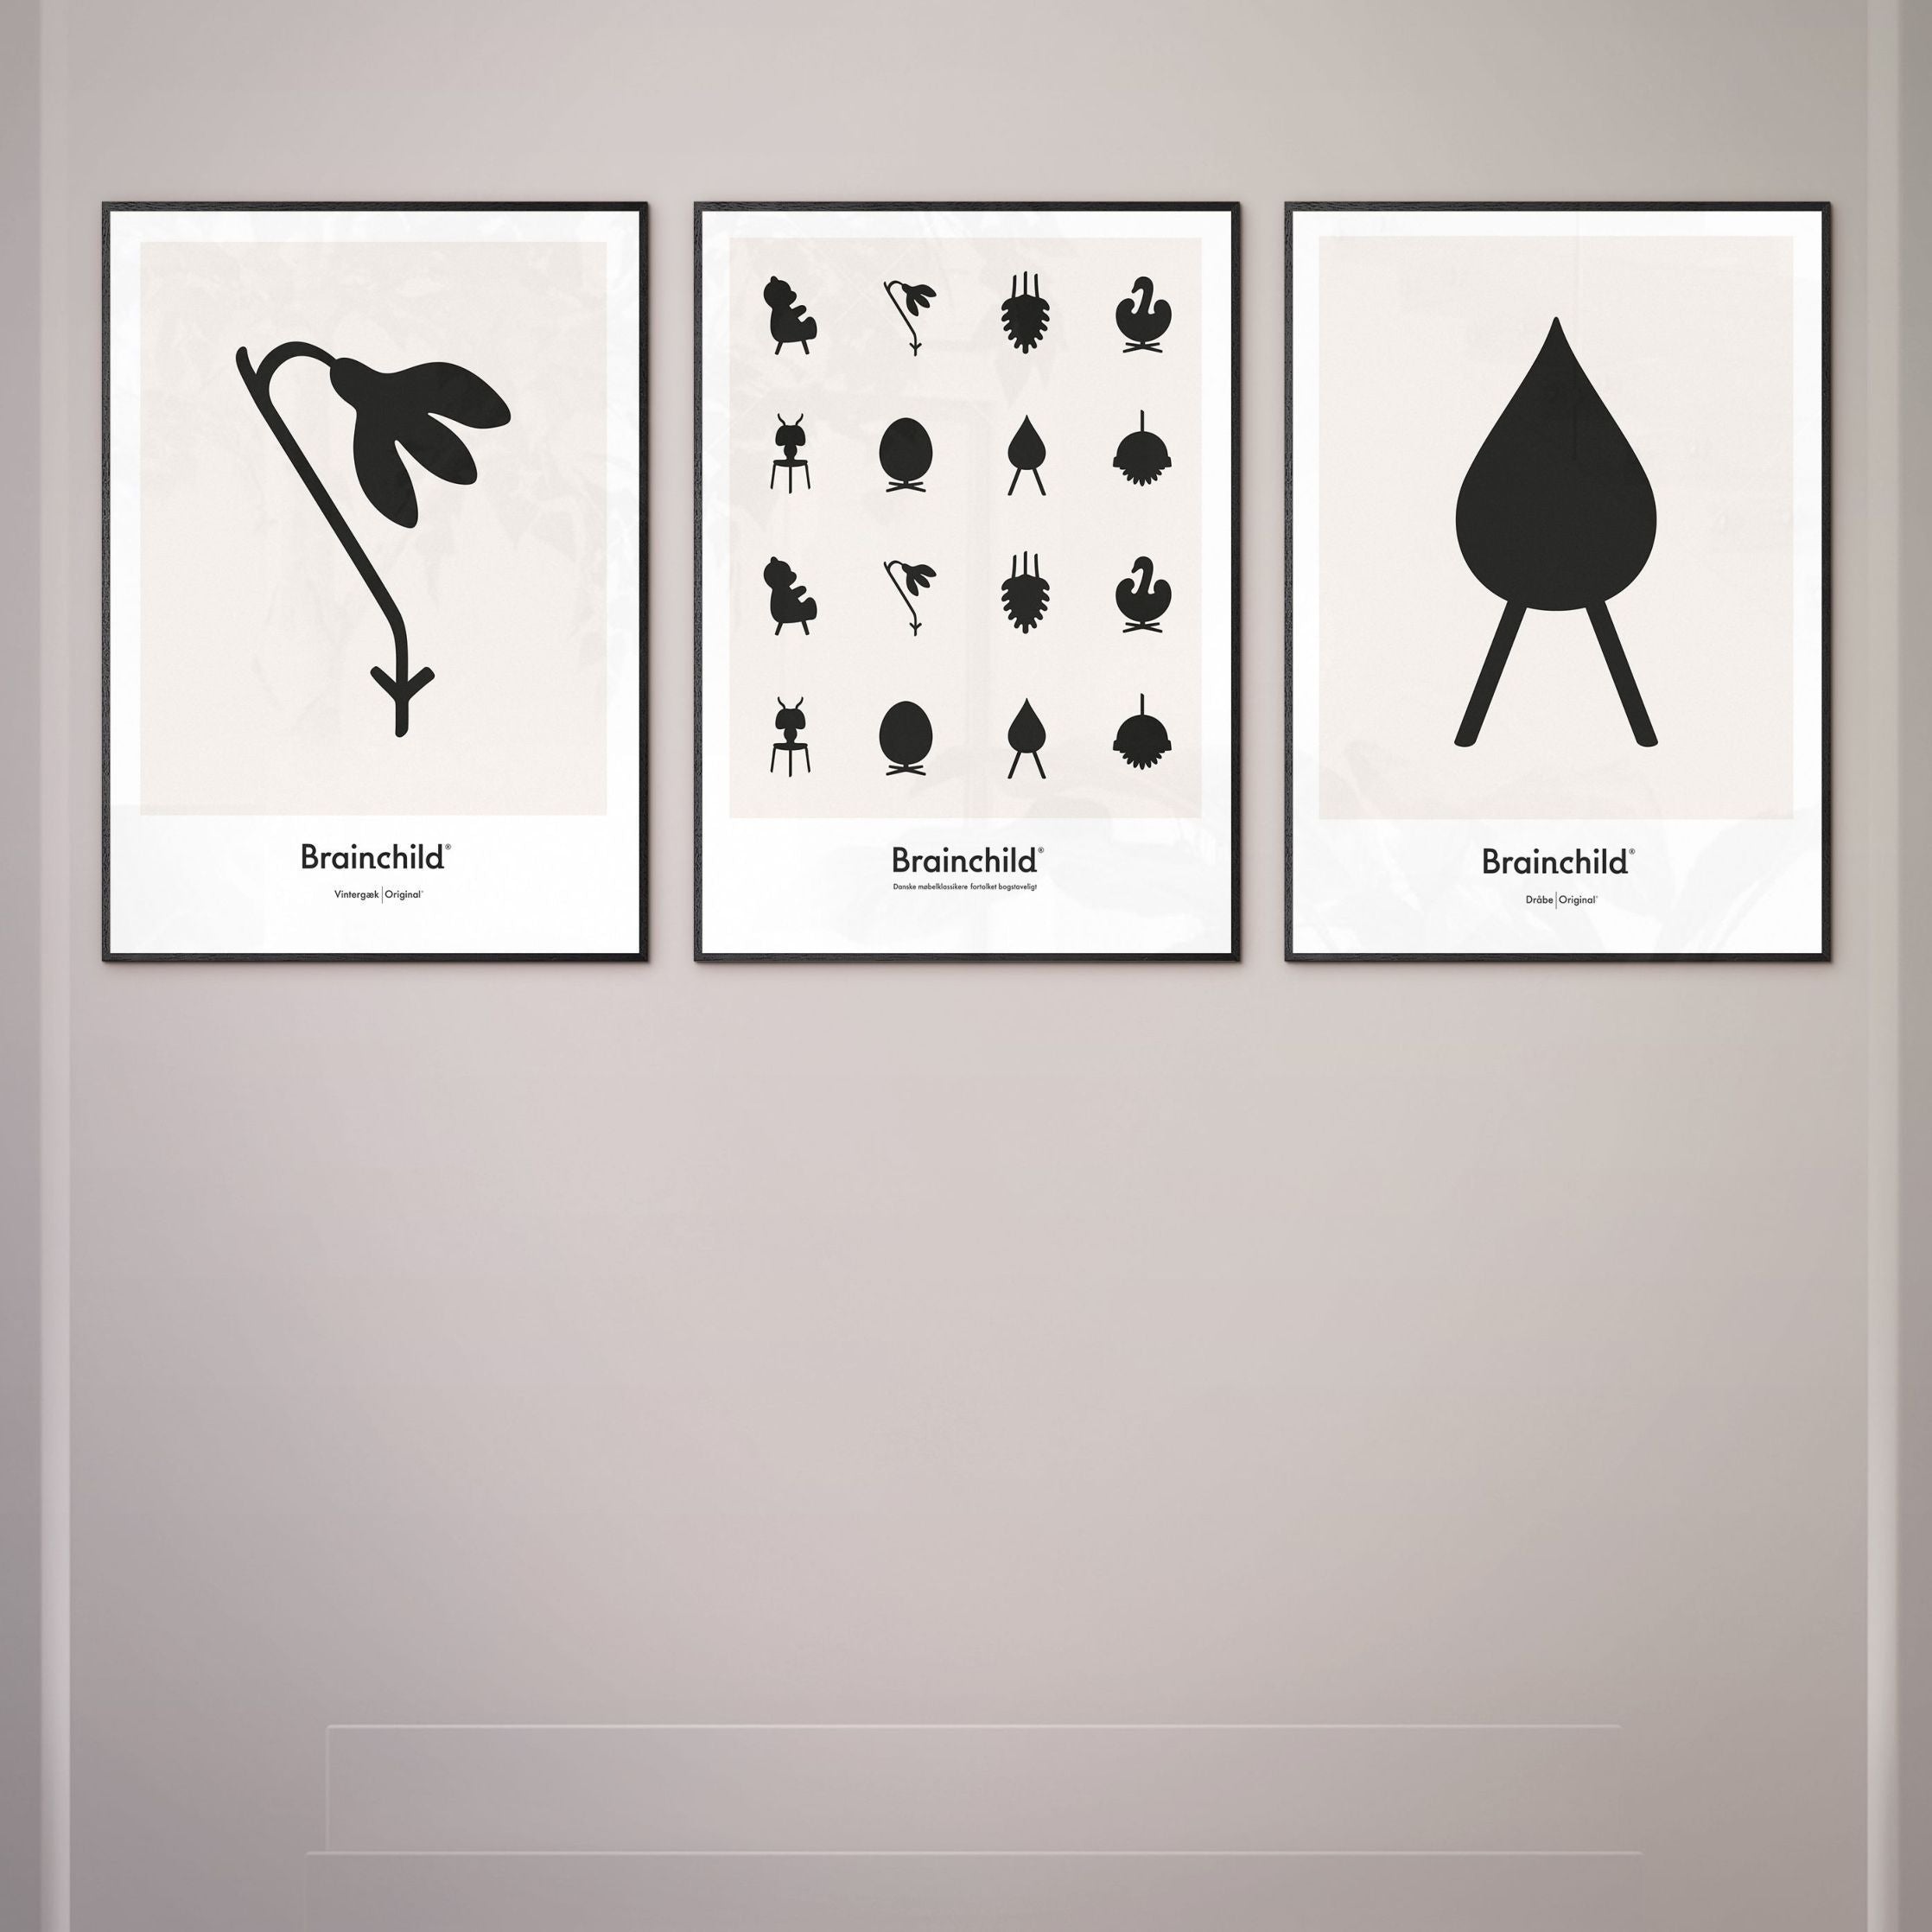 Brainchild Snowdrop Design Icon Poster, Frame Made Of Black Lacquered Wood A5, Grey